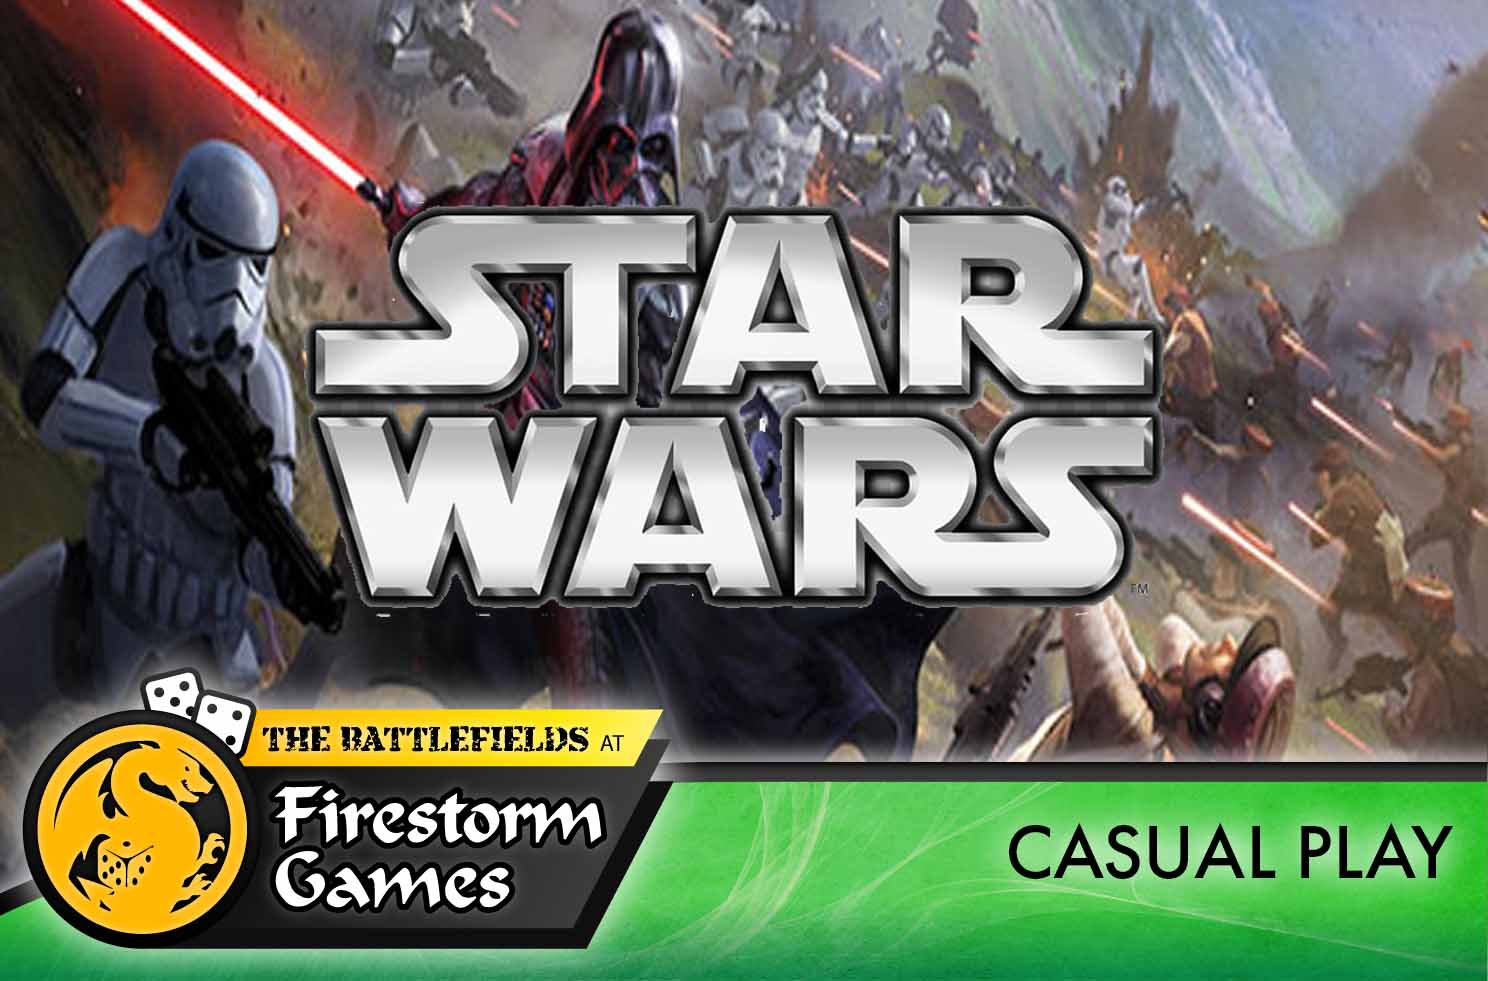 Star Wars Tuesday Casual Play